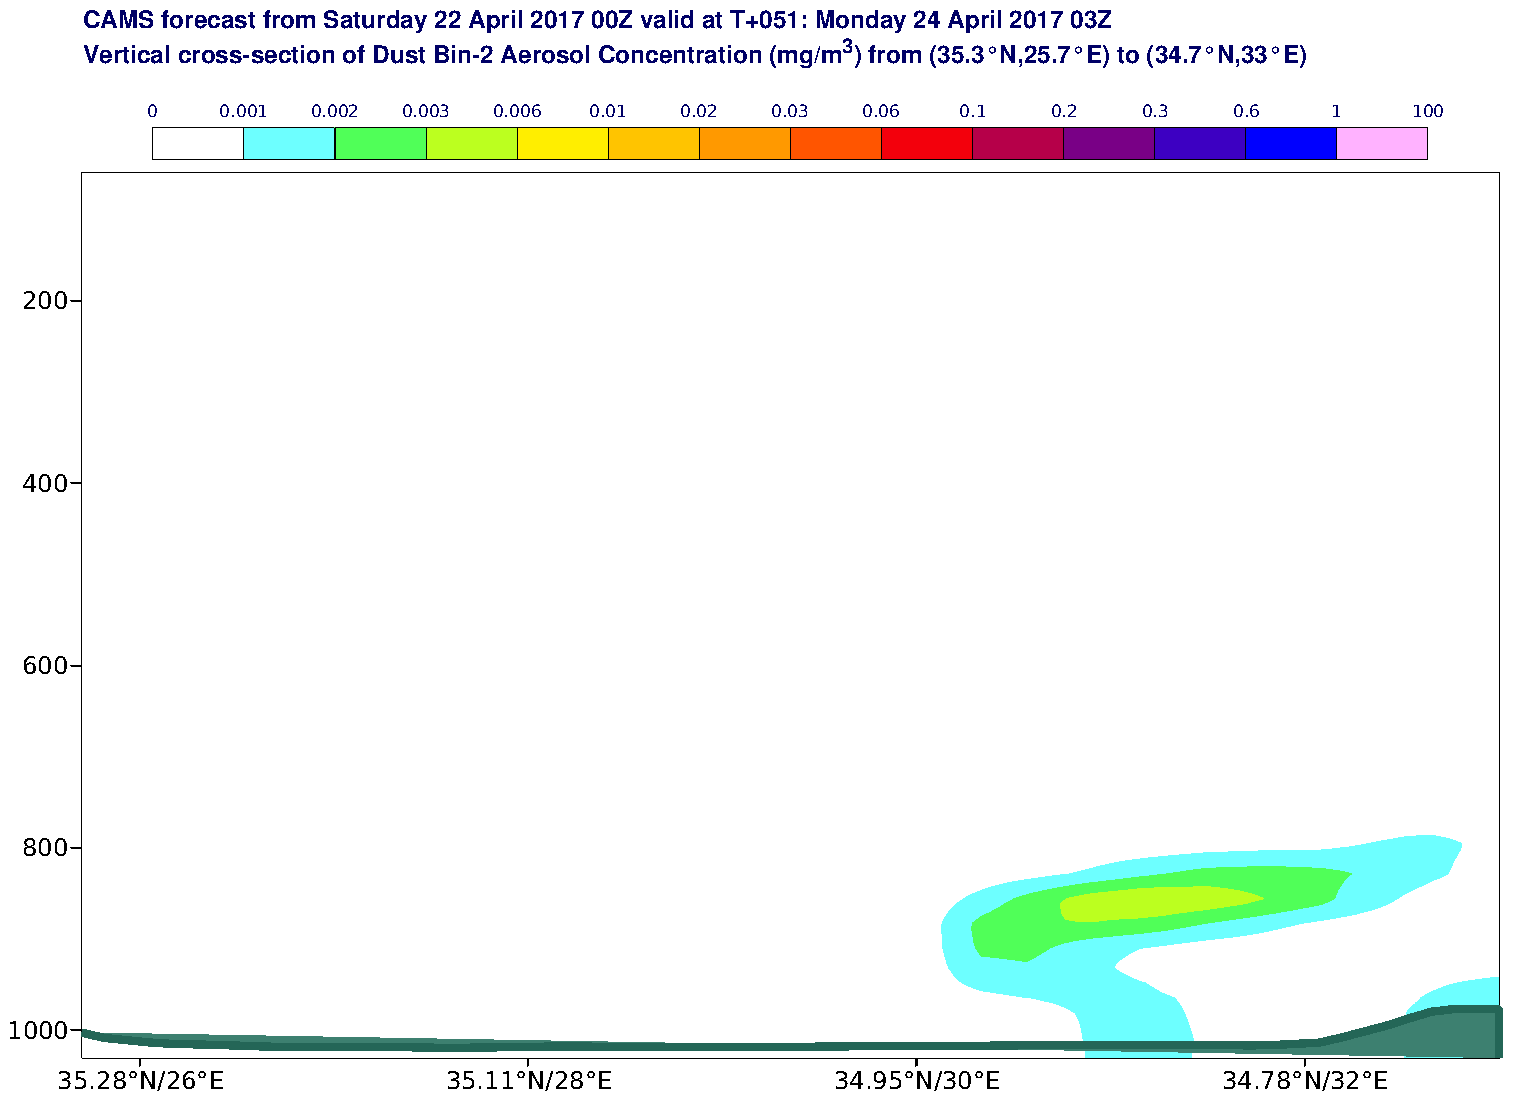 Vertical cross-section of Dust Bin-2 Aerosol Concentration (mg/m3) valid at T51 - 2017-04-24 03:00